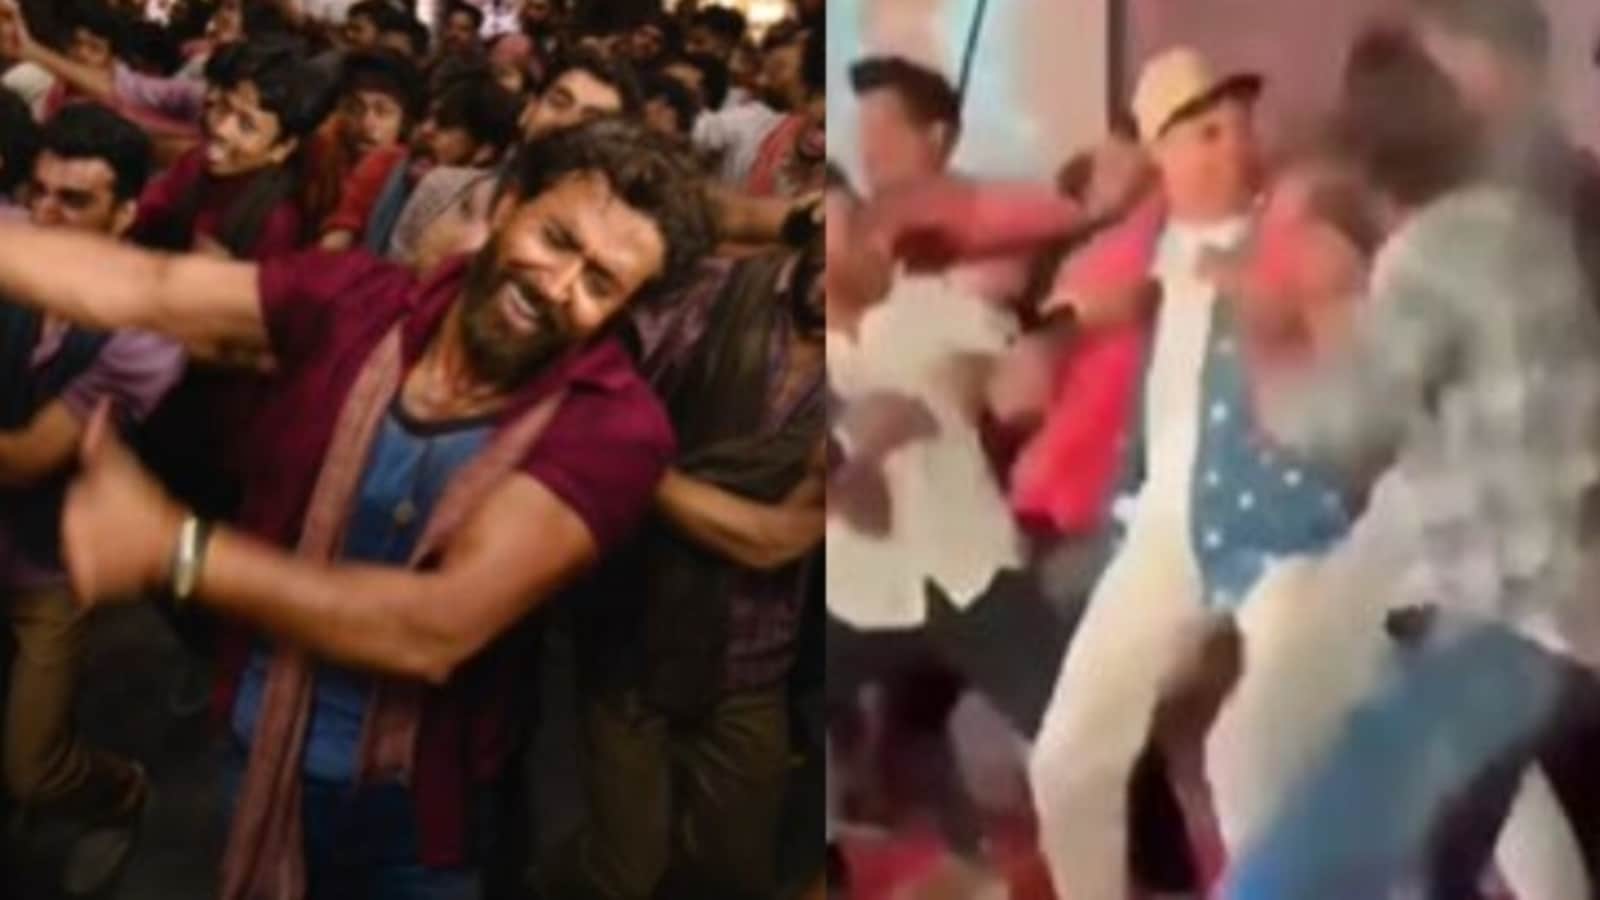 Hrithik Roshan dances to his Vikram Vedha song Alcoholia with fans, teaches them steps. Watch